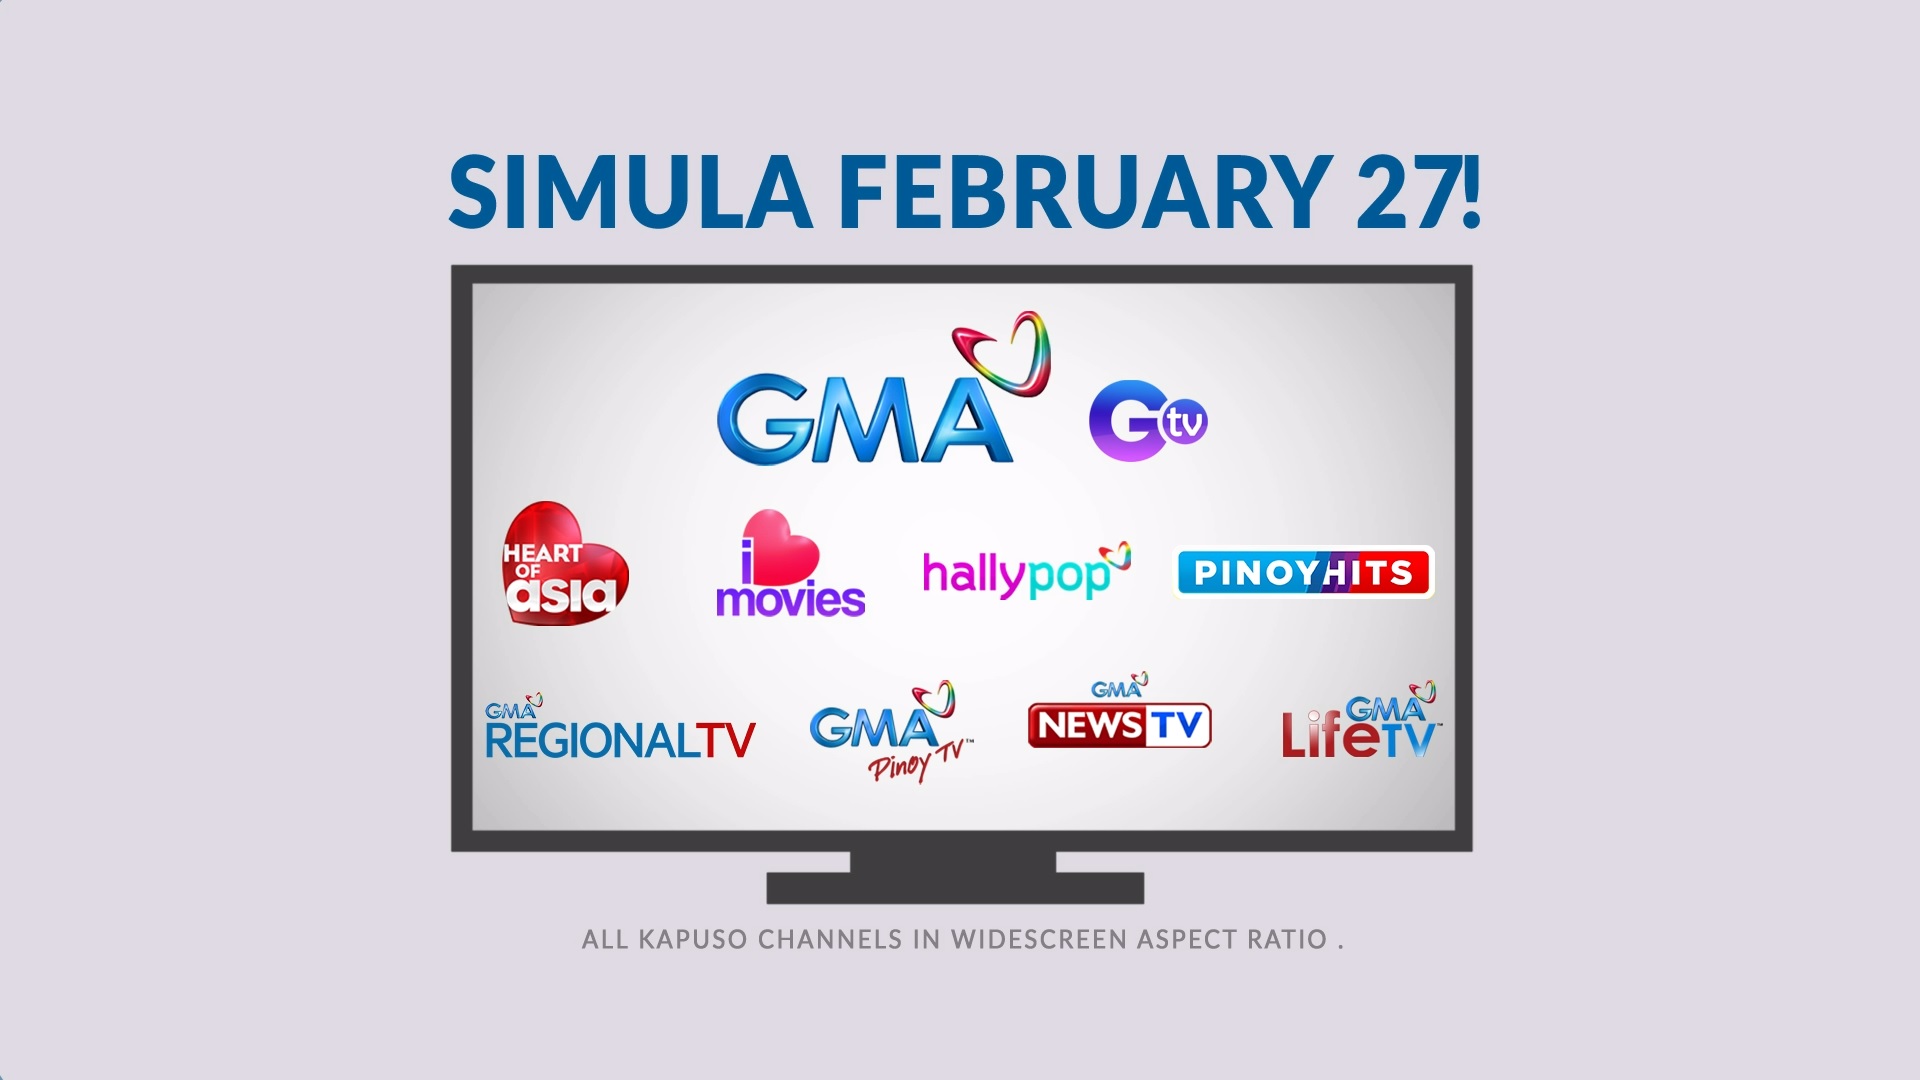 GMA and all of its local and international channels are switching to the widescreen format beginning February 27